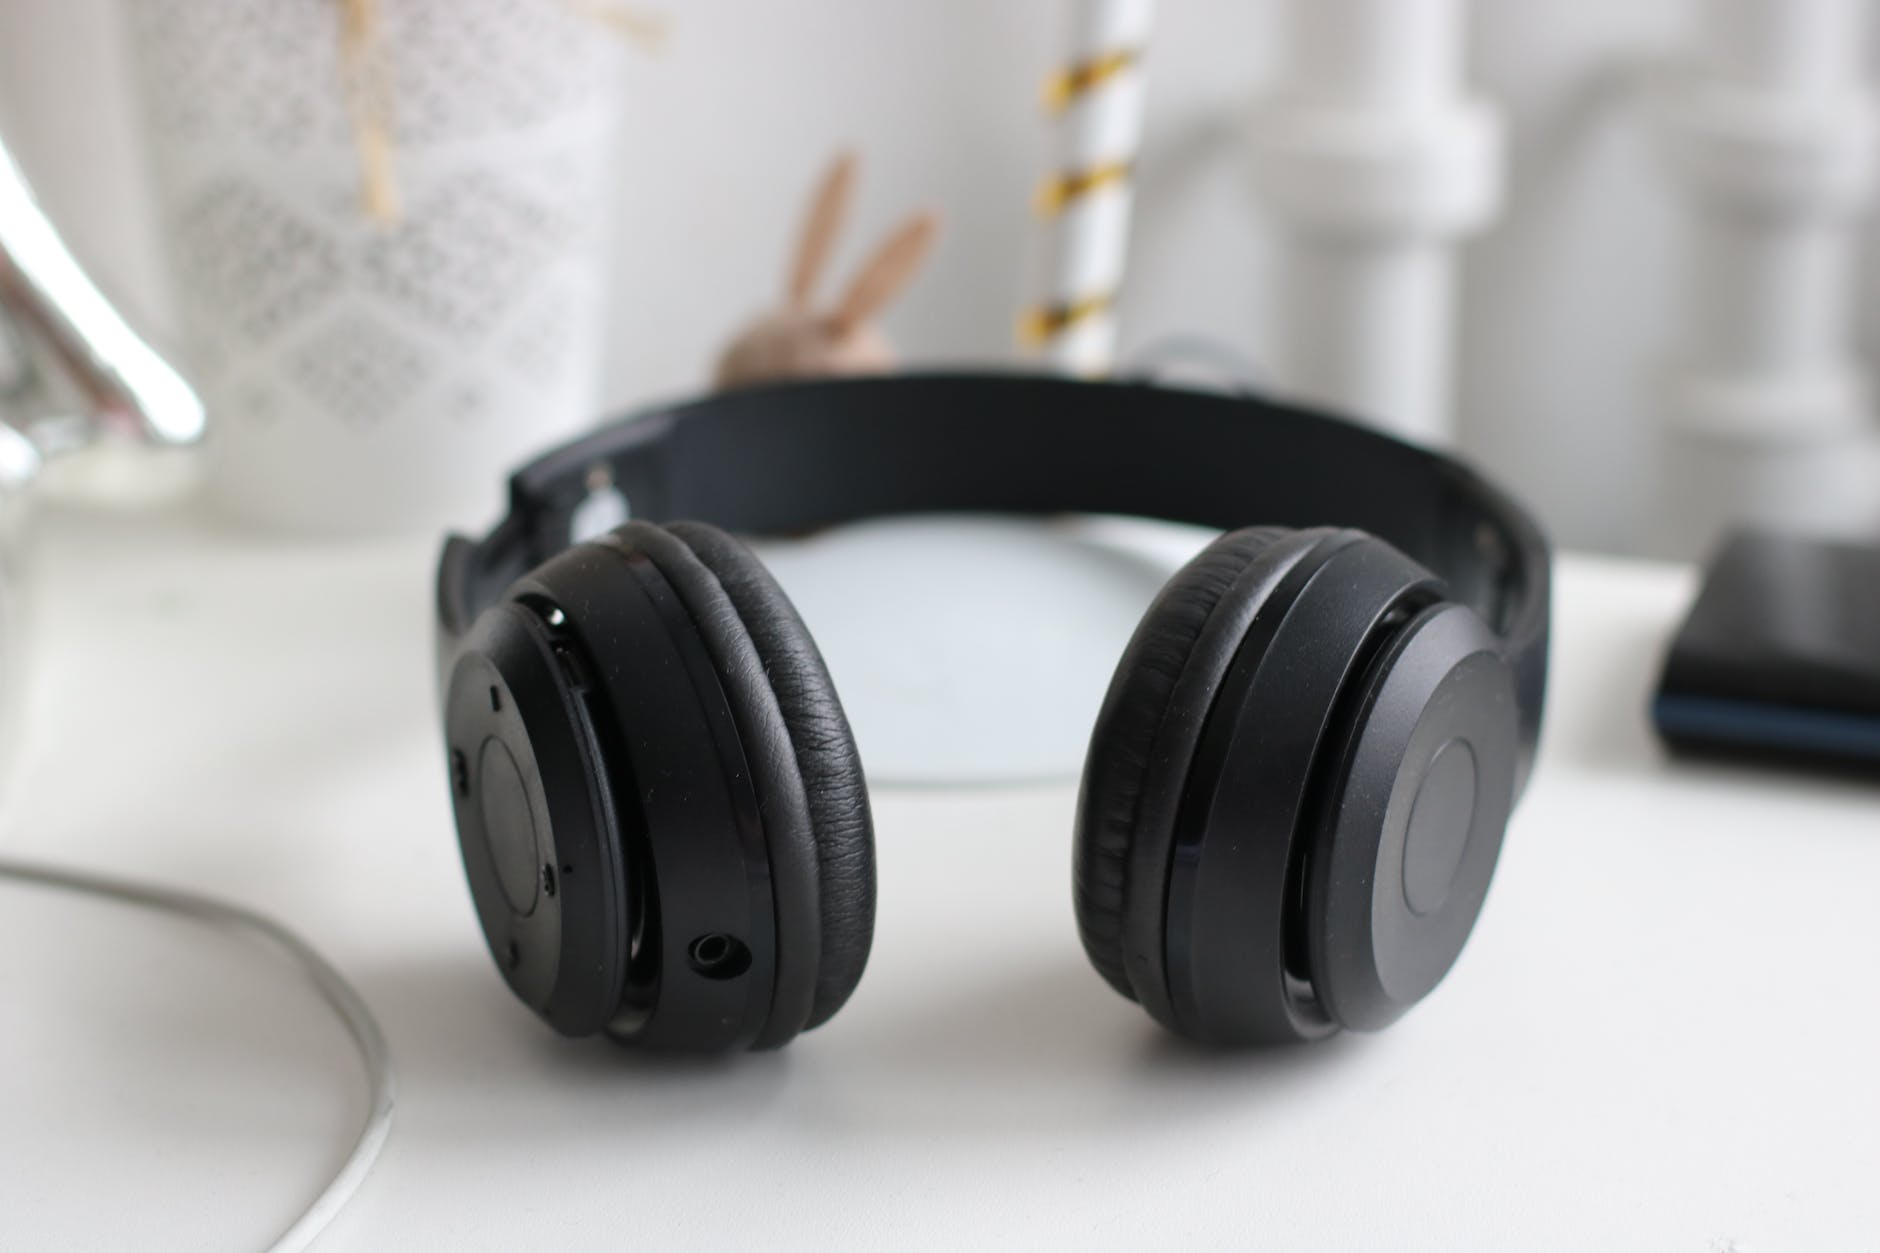 How to Choose the Best Headphones for Your Needs